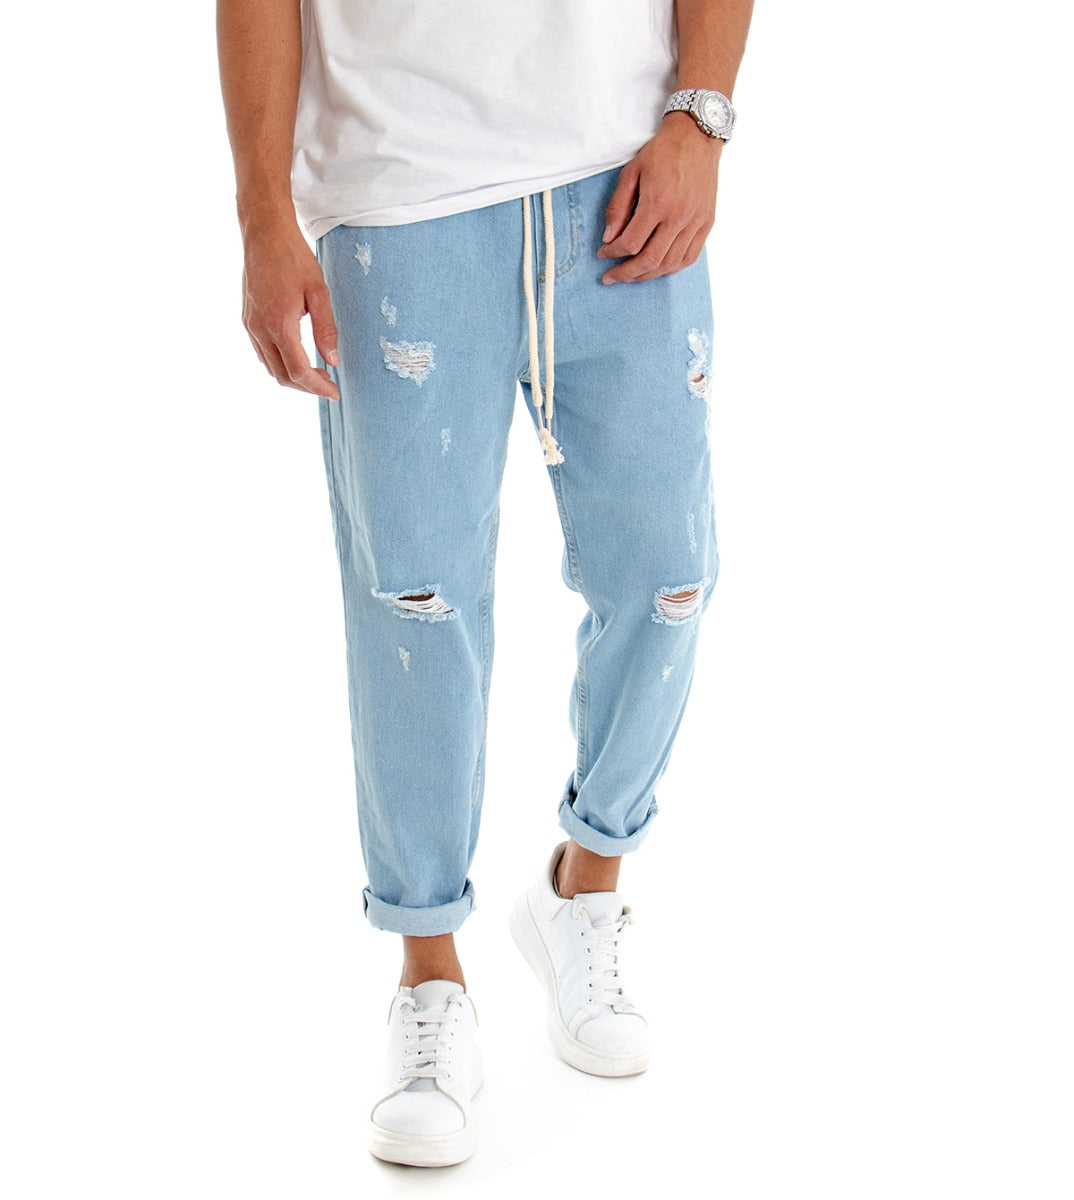 Men's Light Denim Jeans Trousers Loose Fit Drawstring Trousers GIOSAL-P3021A